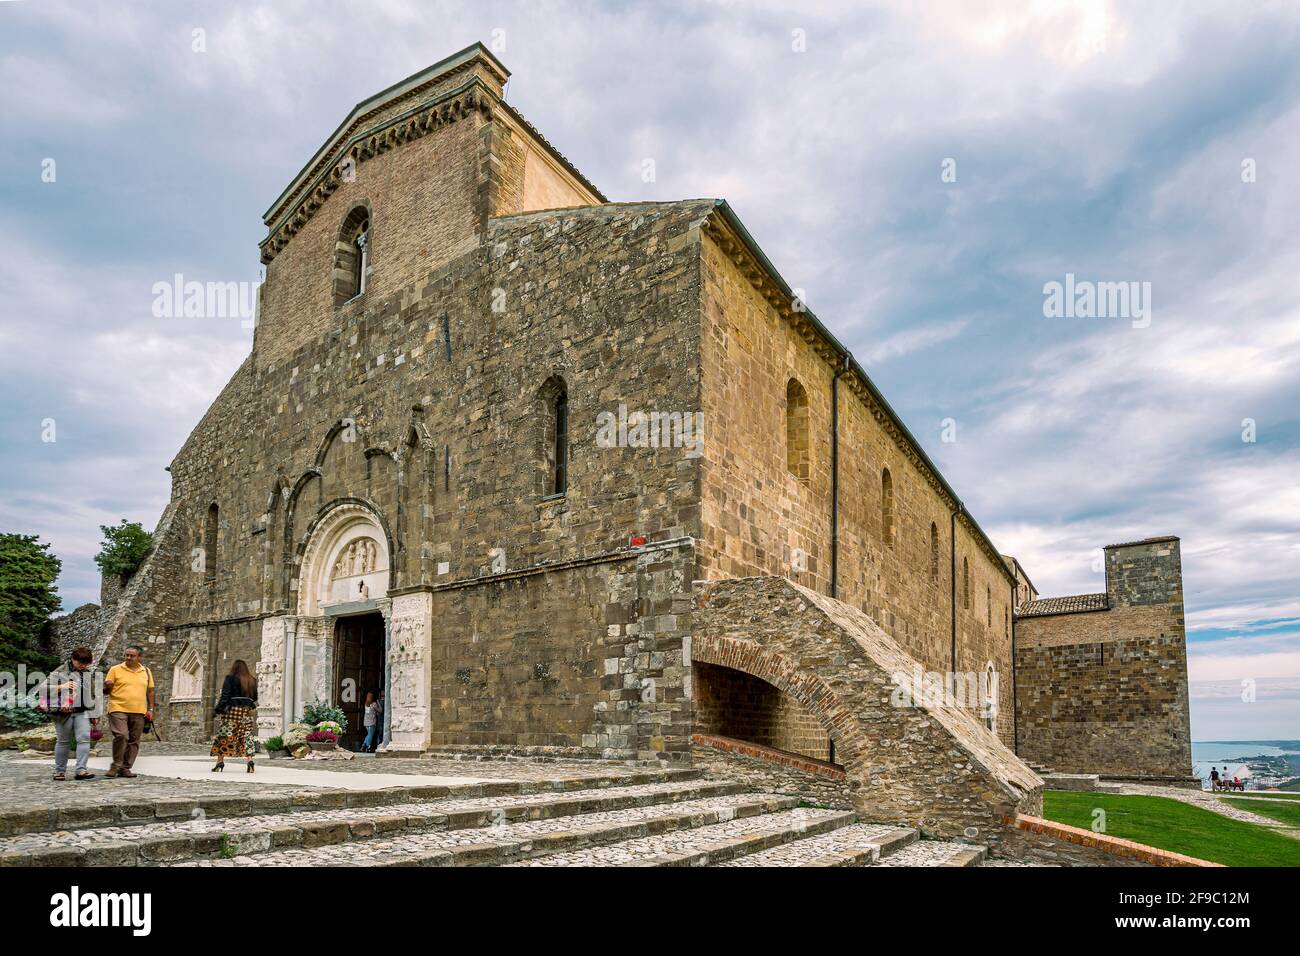 abbey of San Giovanni in Venere, medieval catholic church and monastery in Romanesque and Gothic style.Fossacesia, chieti province, Abruzzo, Italy Stock Photo